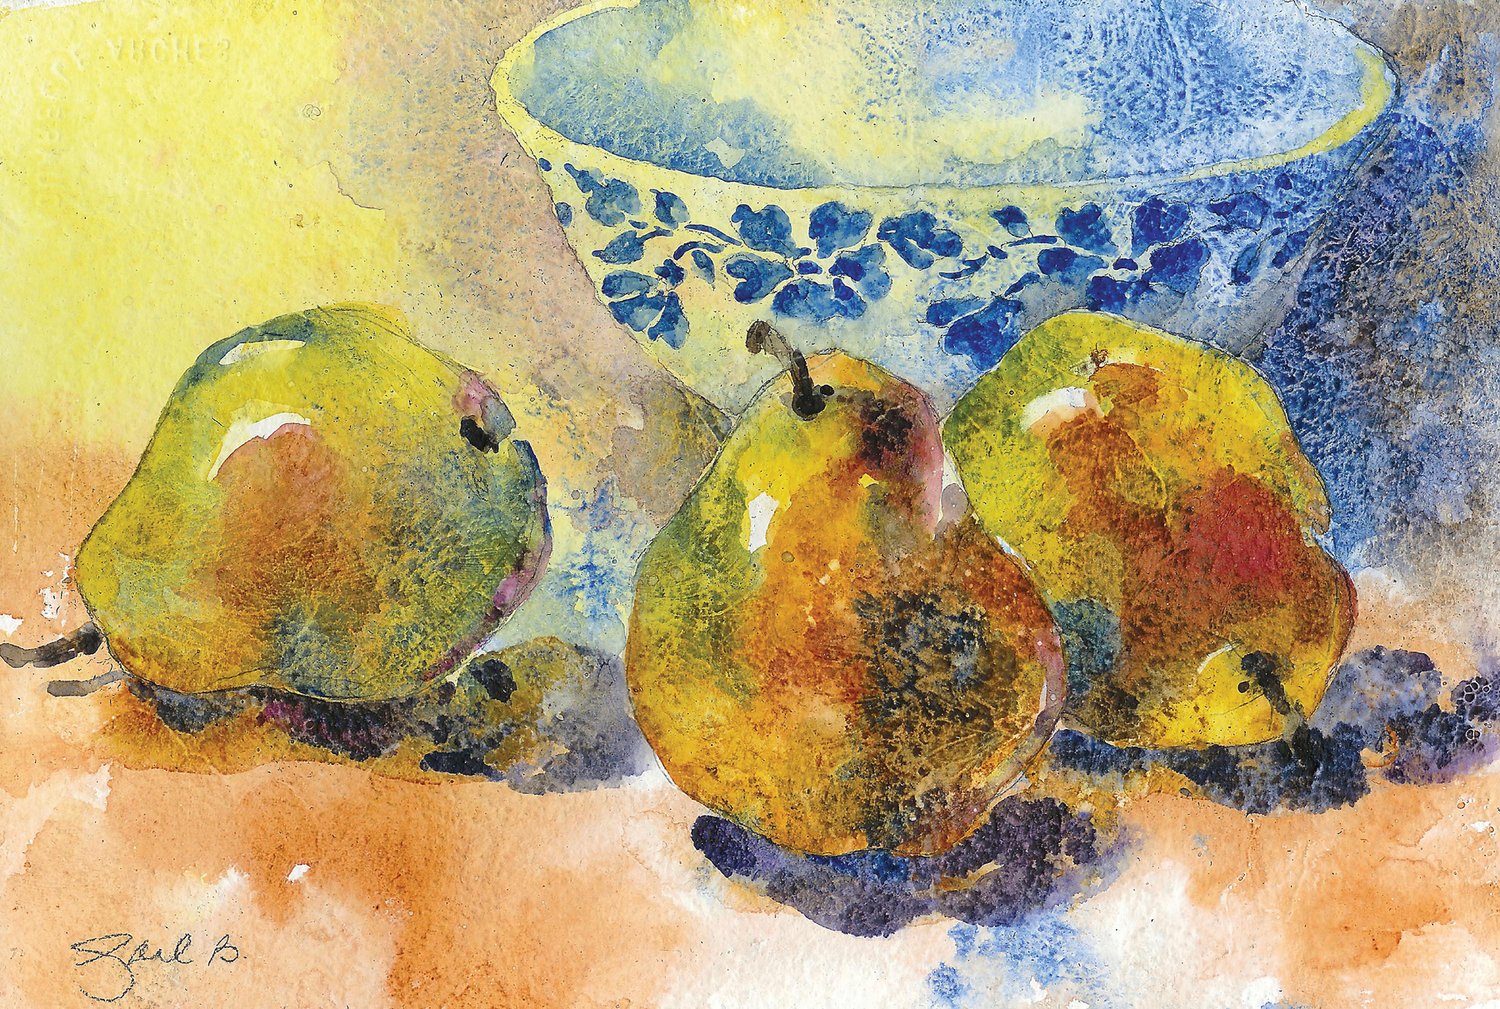 “Pears and Bowl” is a watercolor by Gail Bracegirdle.